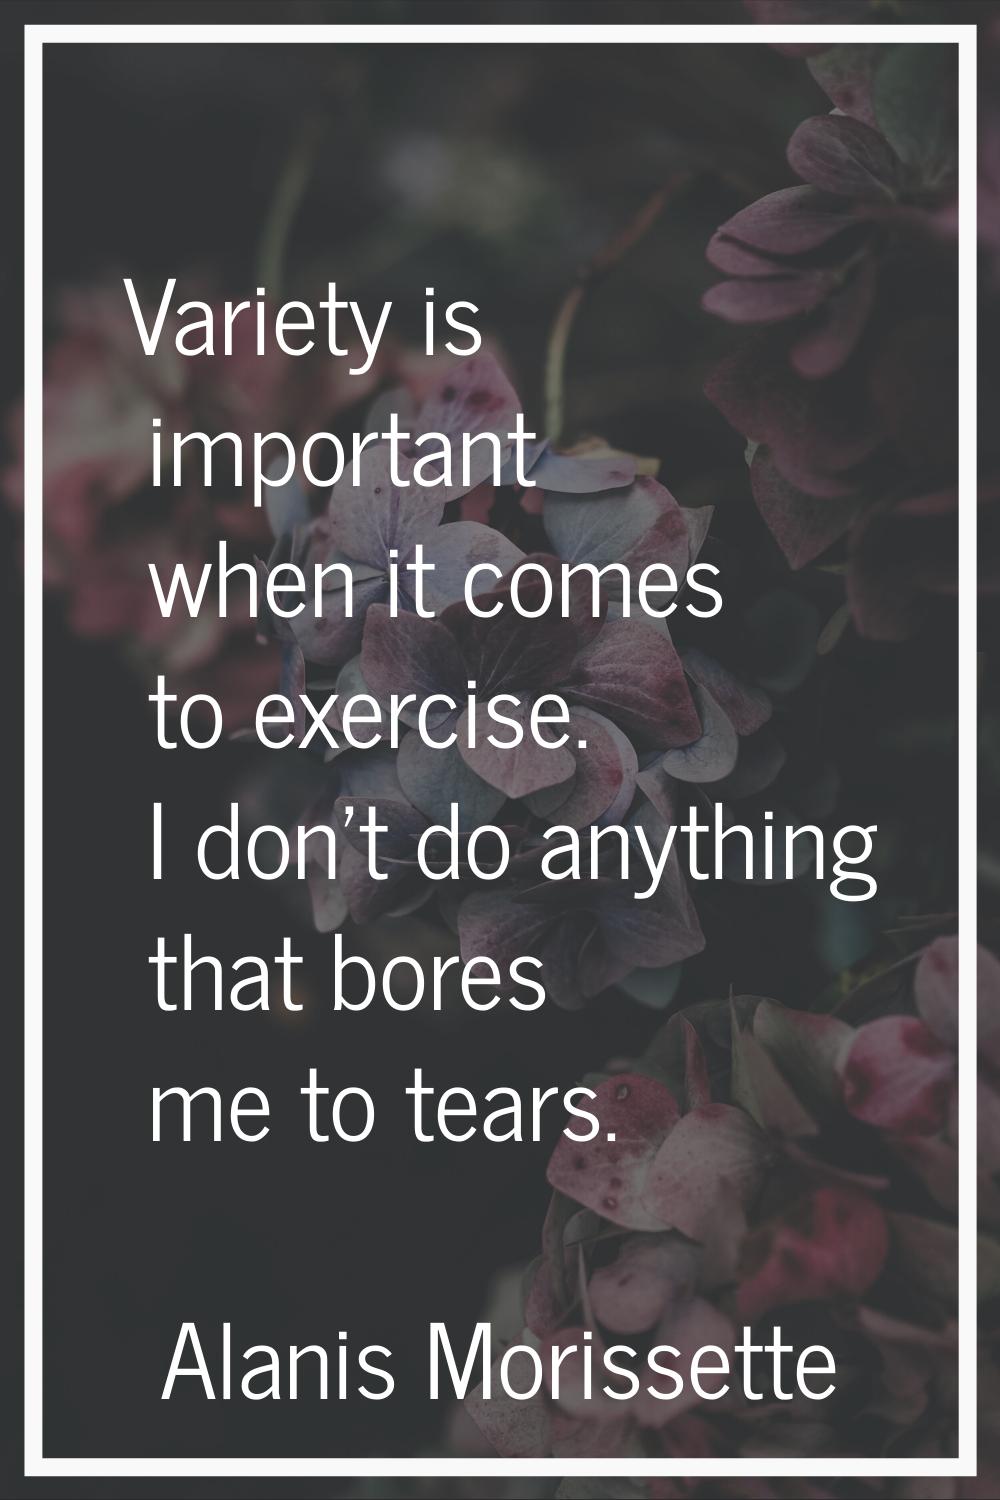 Variety is important when it comes to exercise. I don't do anything that bores me to tears.